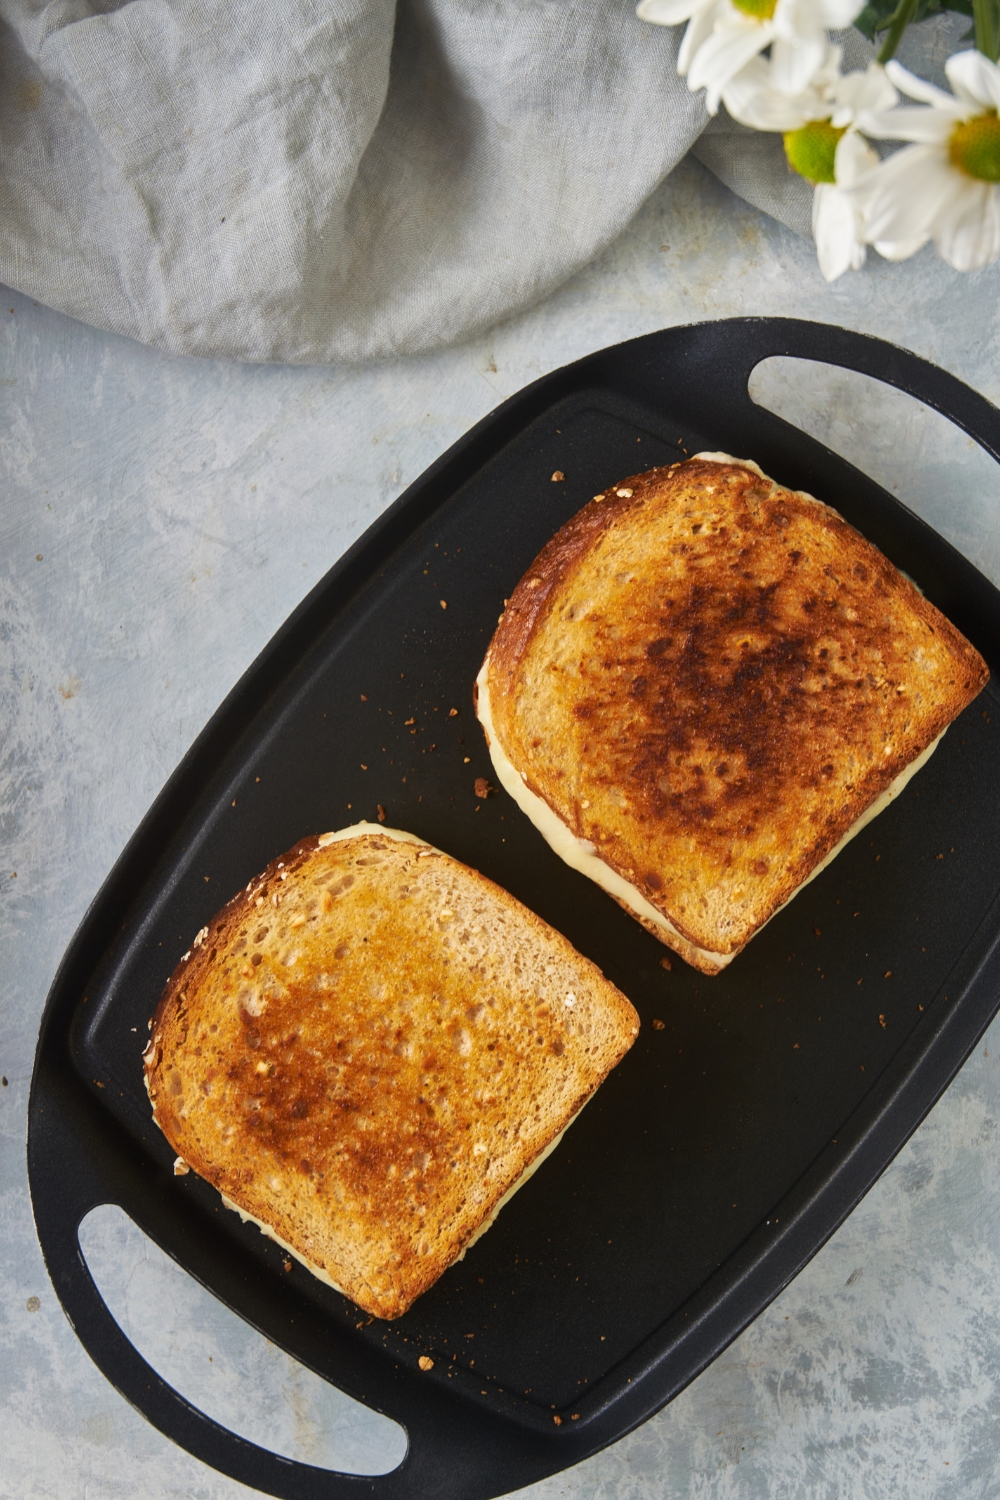 A griddle with two grilled cheese sandwiches being cooked on it. They have just been flipped and the golden brown side is facing up.